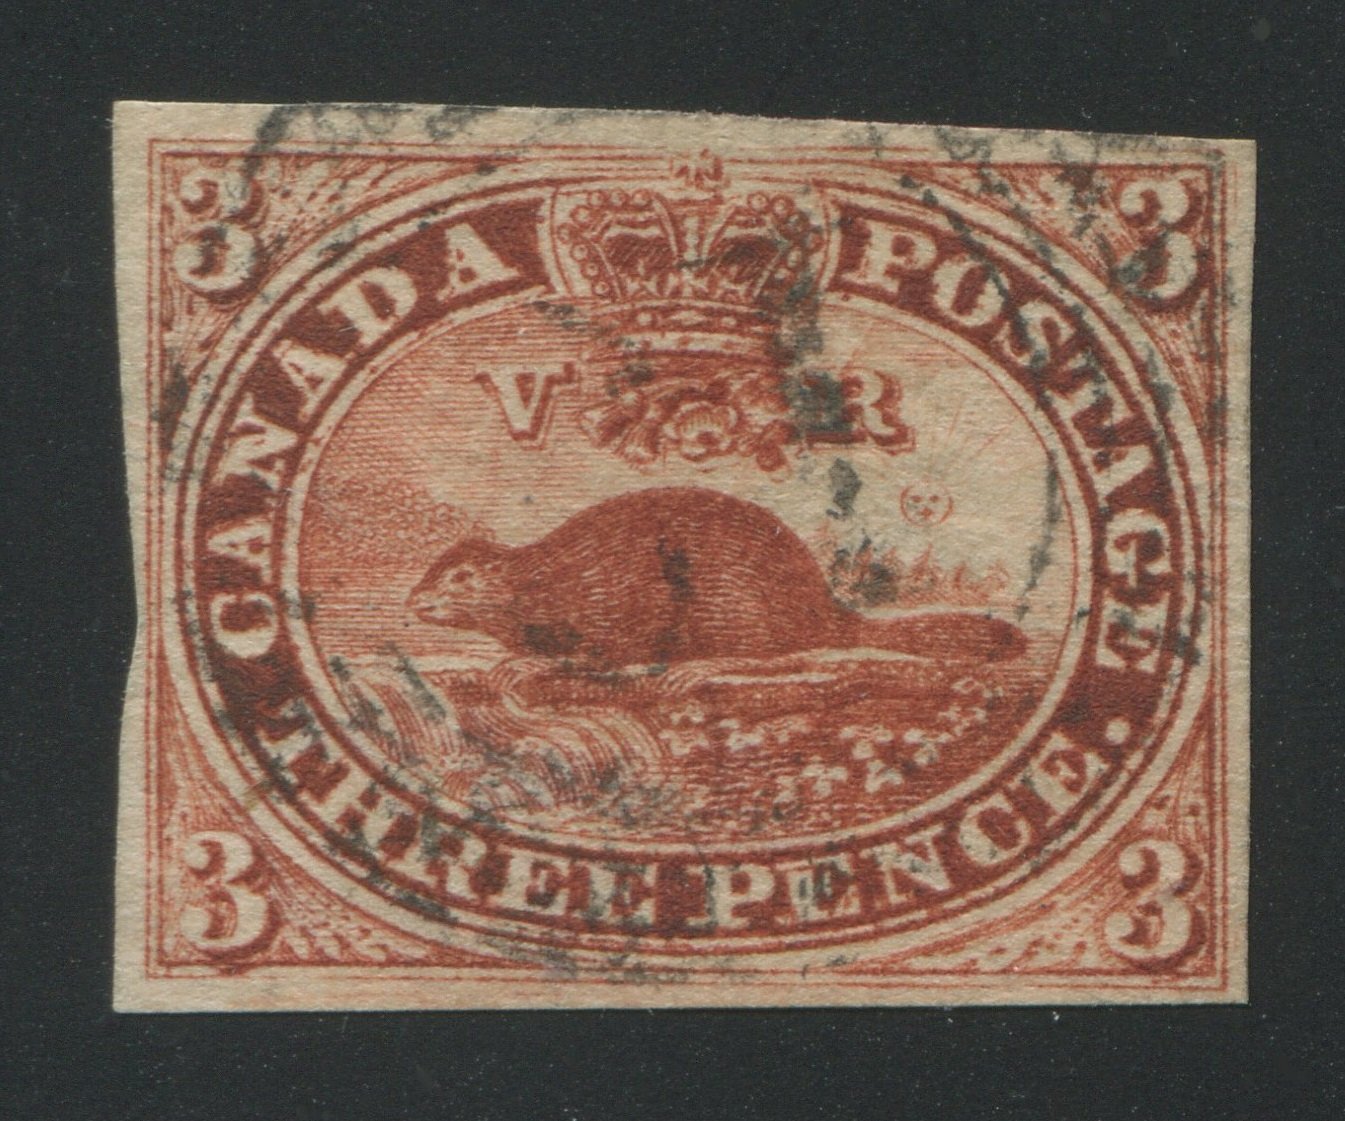 0004CA1709 - Canada #4iii, xi - Used Major Re-Entry - Deveney Stamps Ltd. Canadian Stamps